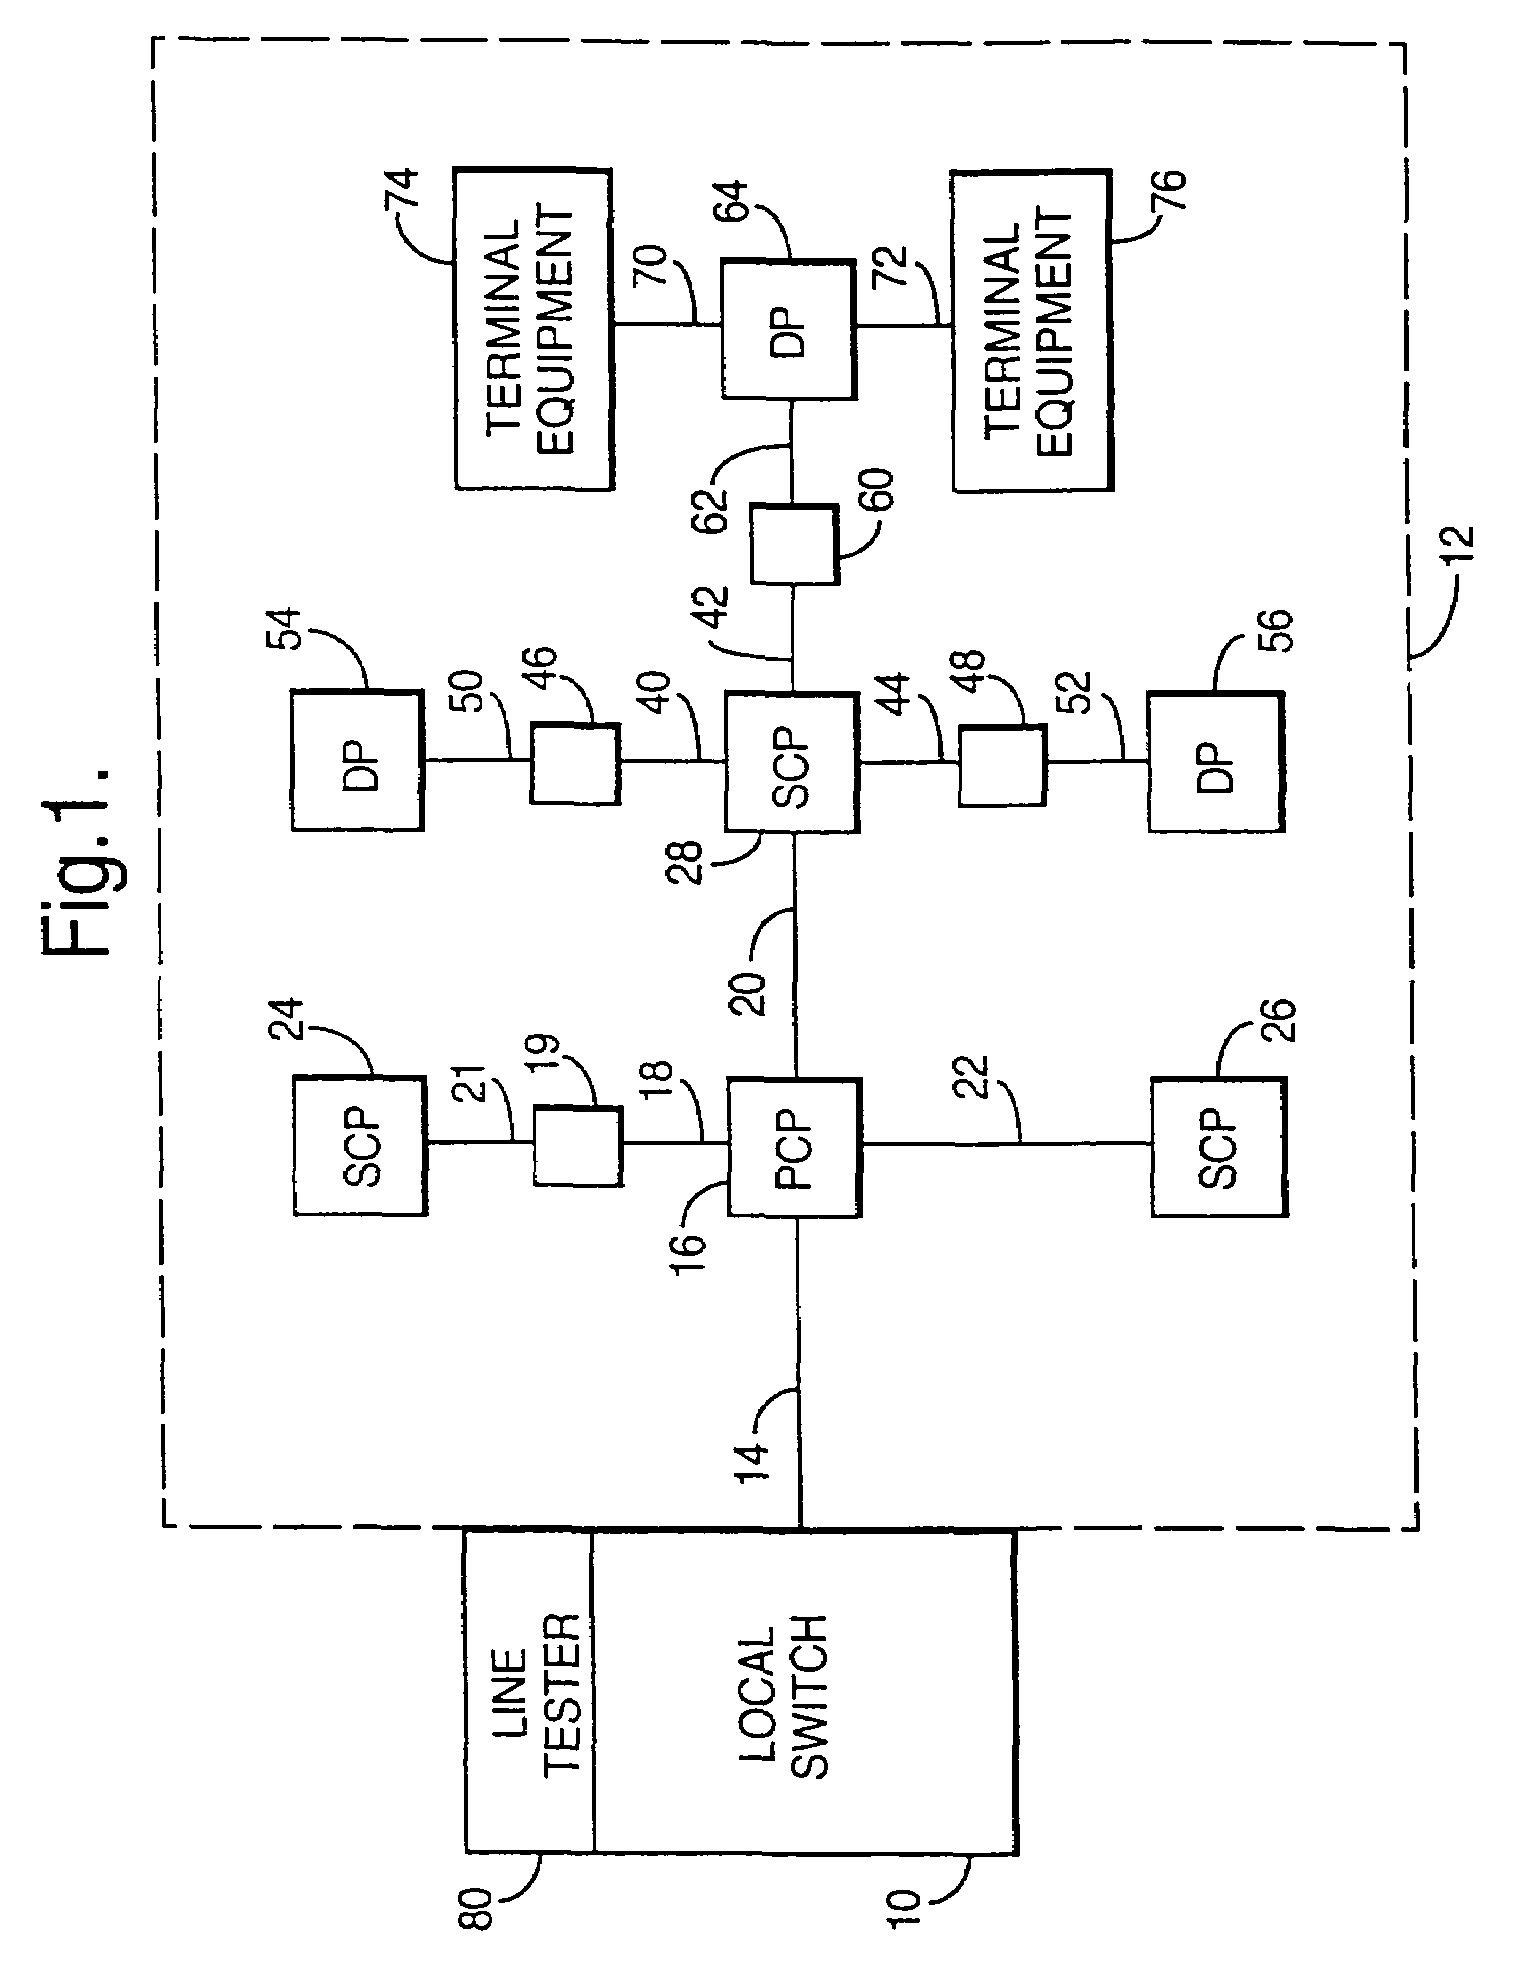 Fault management system for a communications network